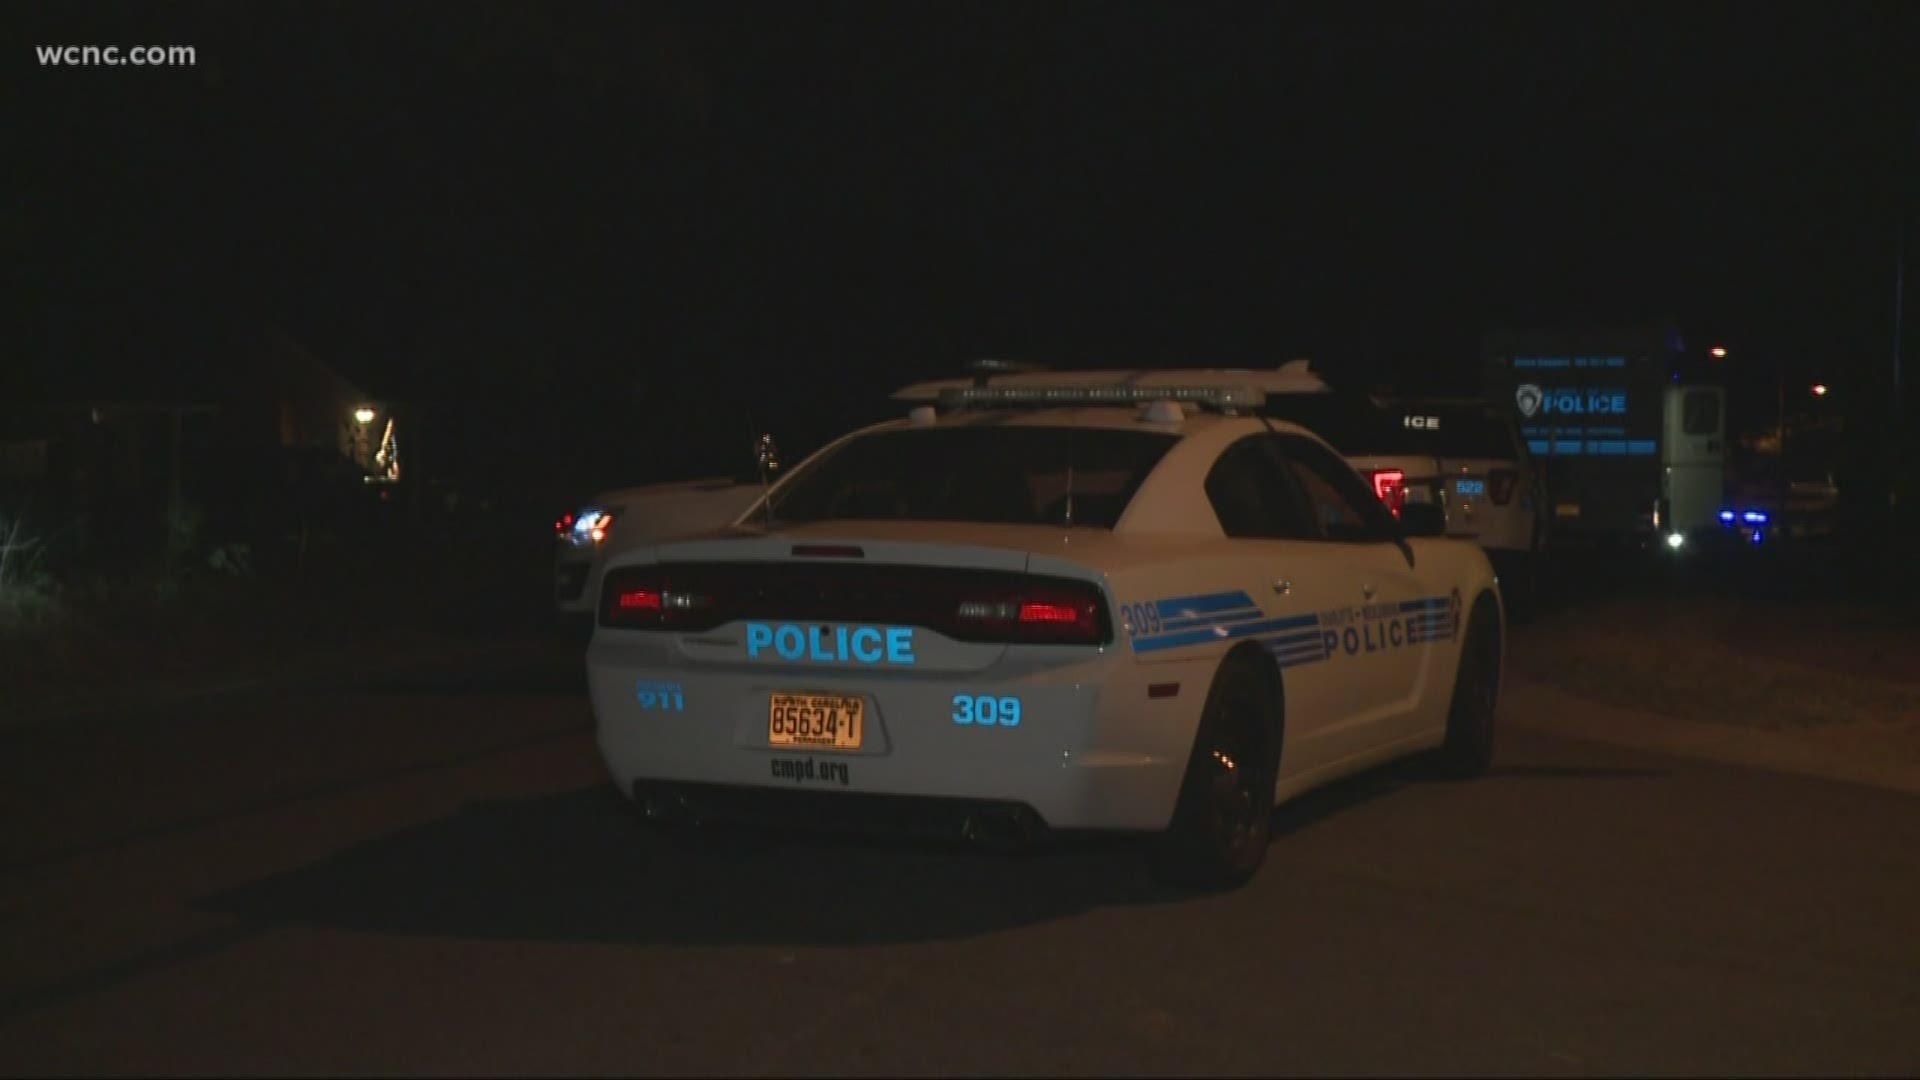 Officers found a 16-year-old lying in the road with a gunshot wound just before 1 a.m. It happened on Linds Vista Lane. Police say the teen had just left a party.